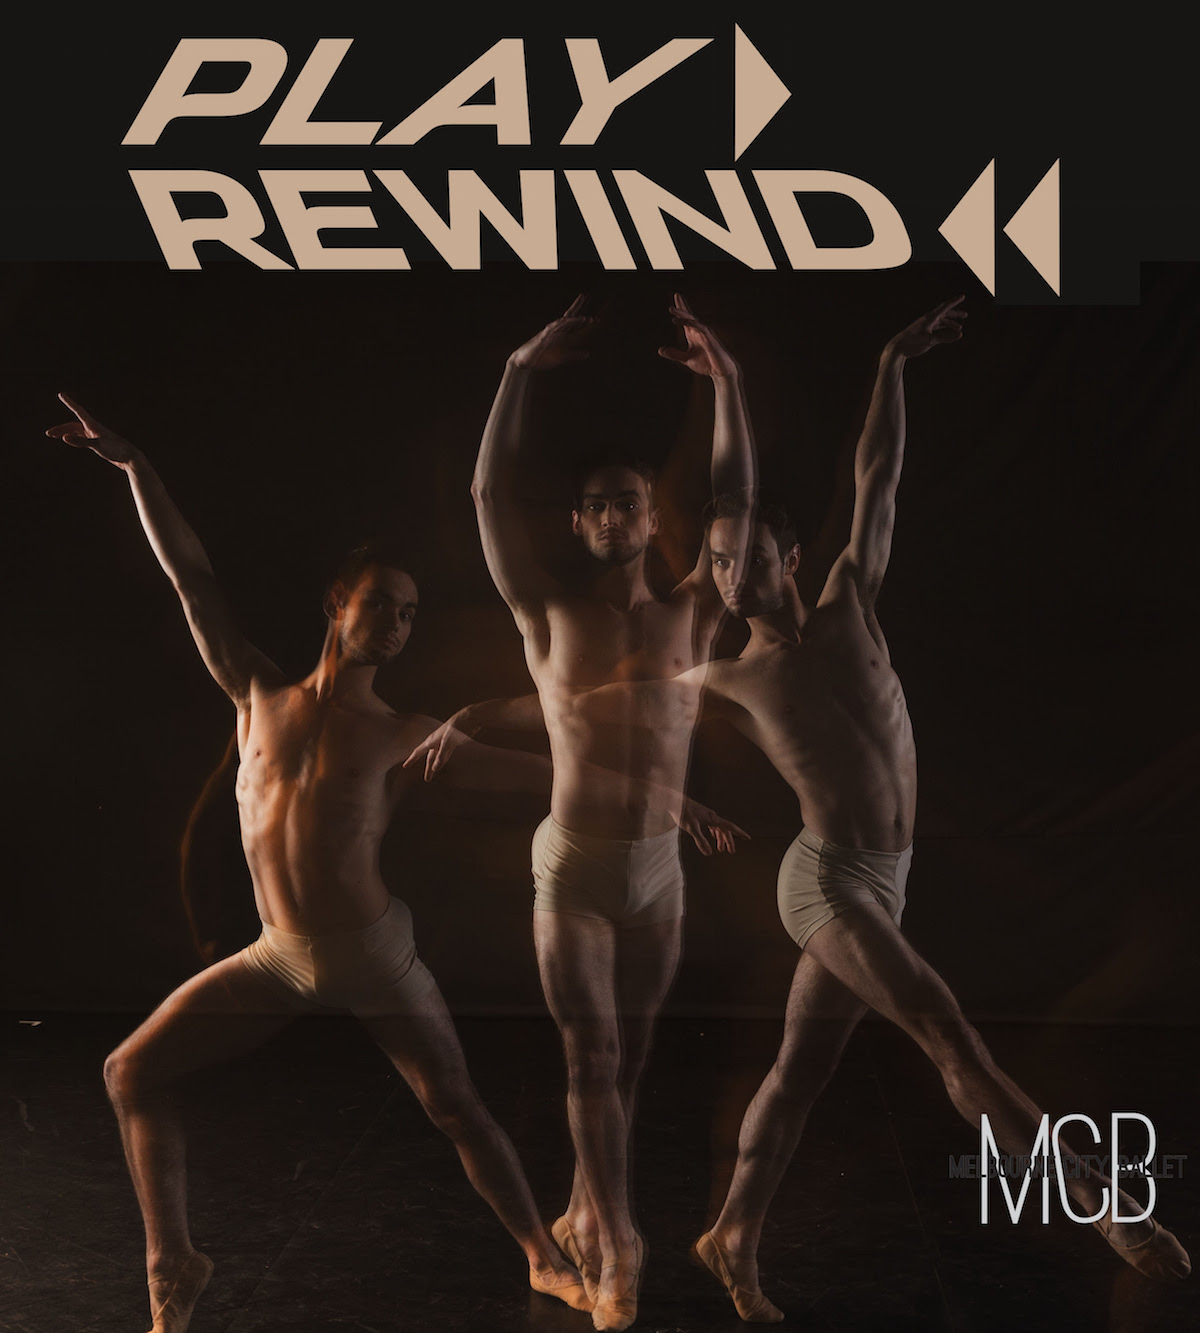 Melbourne City Ballet's Play Rewind for May 2016